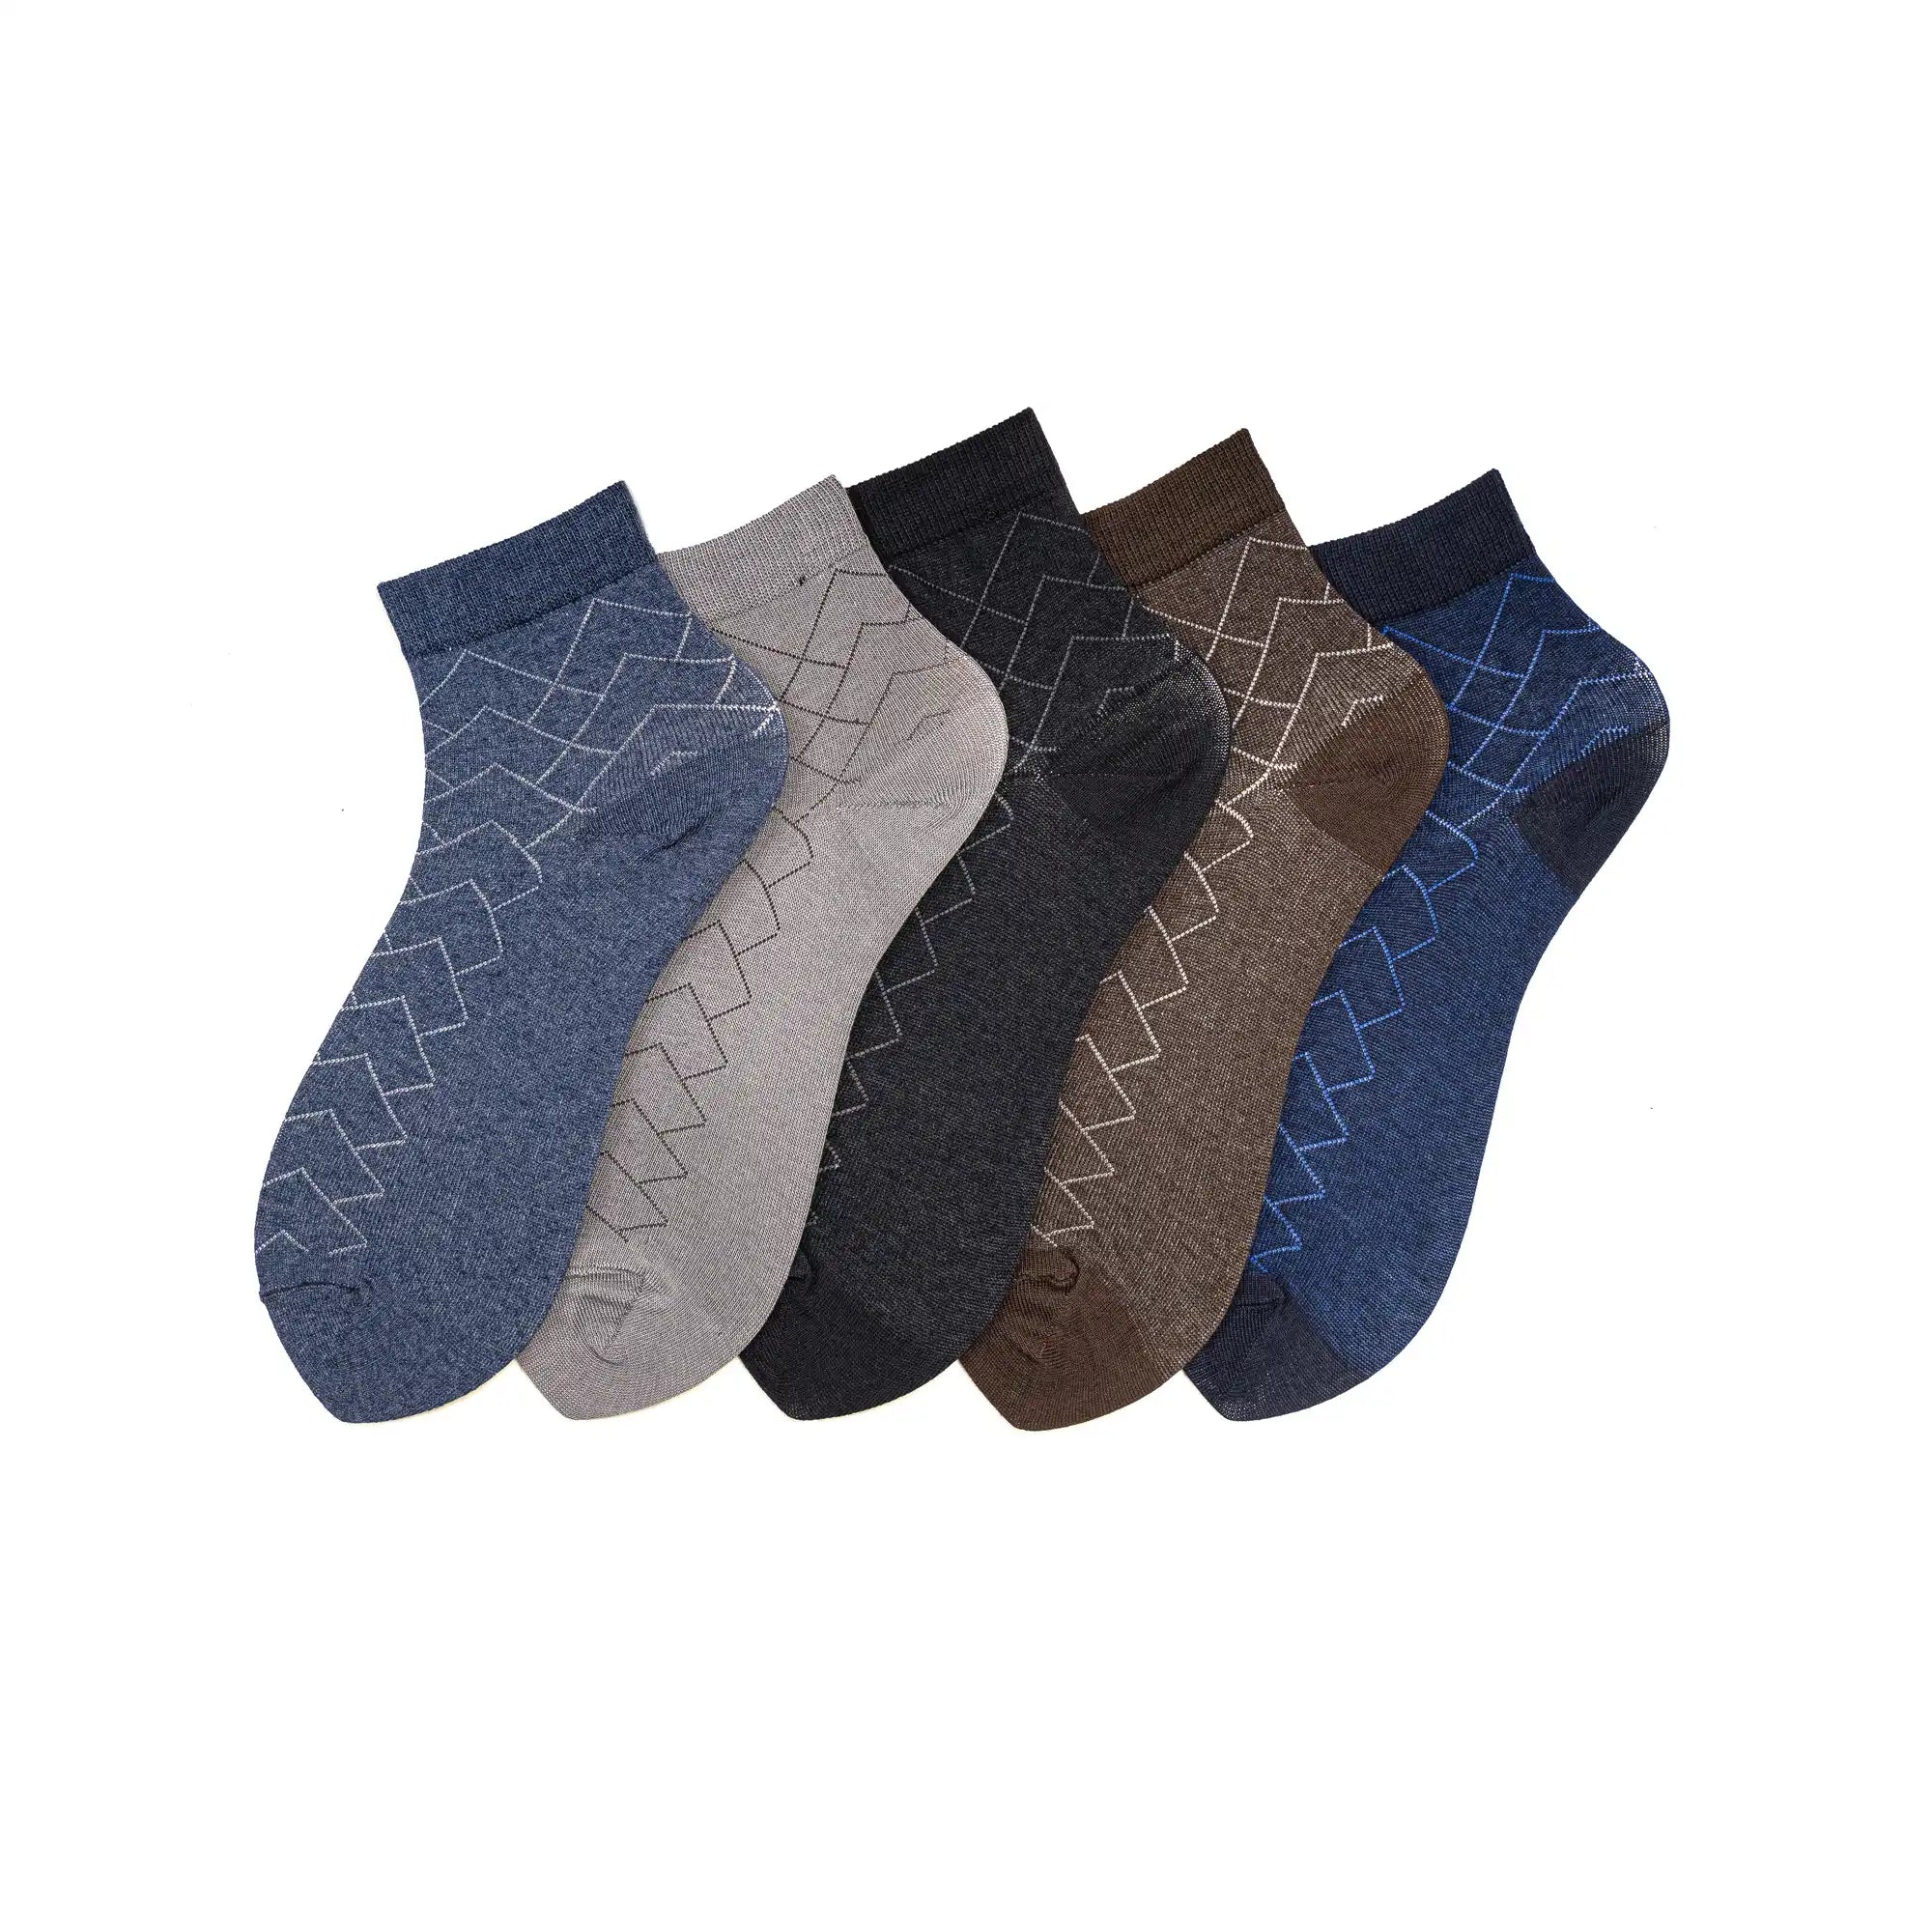 Young Wings Men's Multi Colour Cotton Fabric Solid Ankle Length Socks - Pack of 5, Style no. 2305-M1